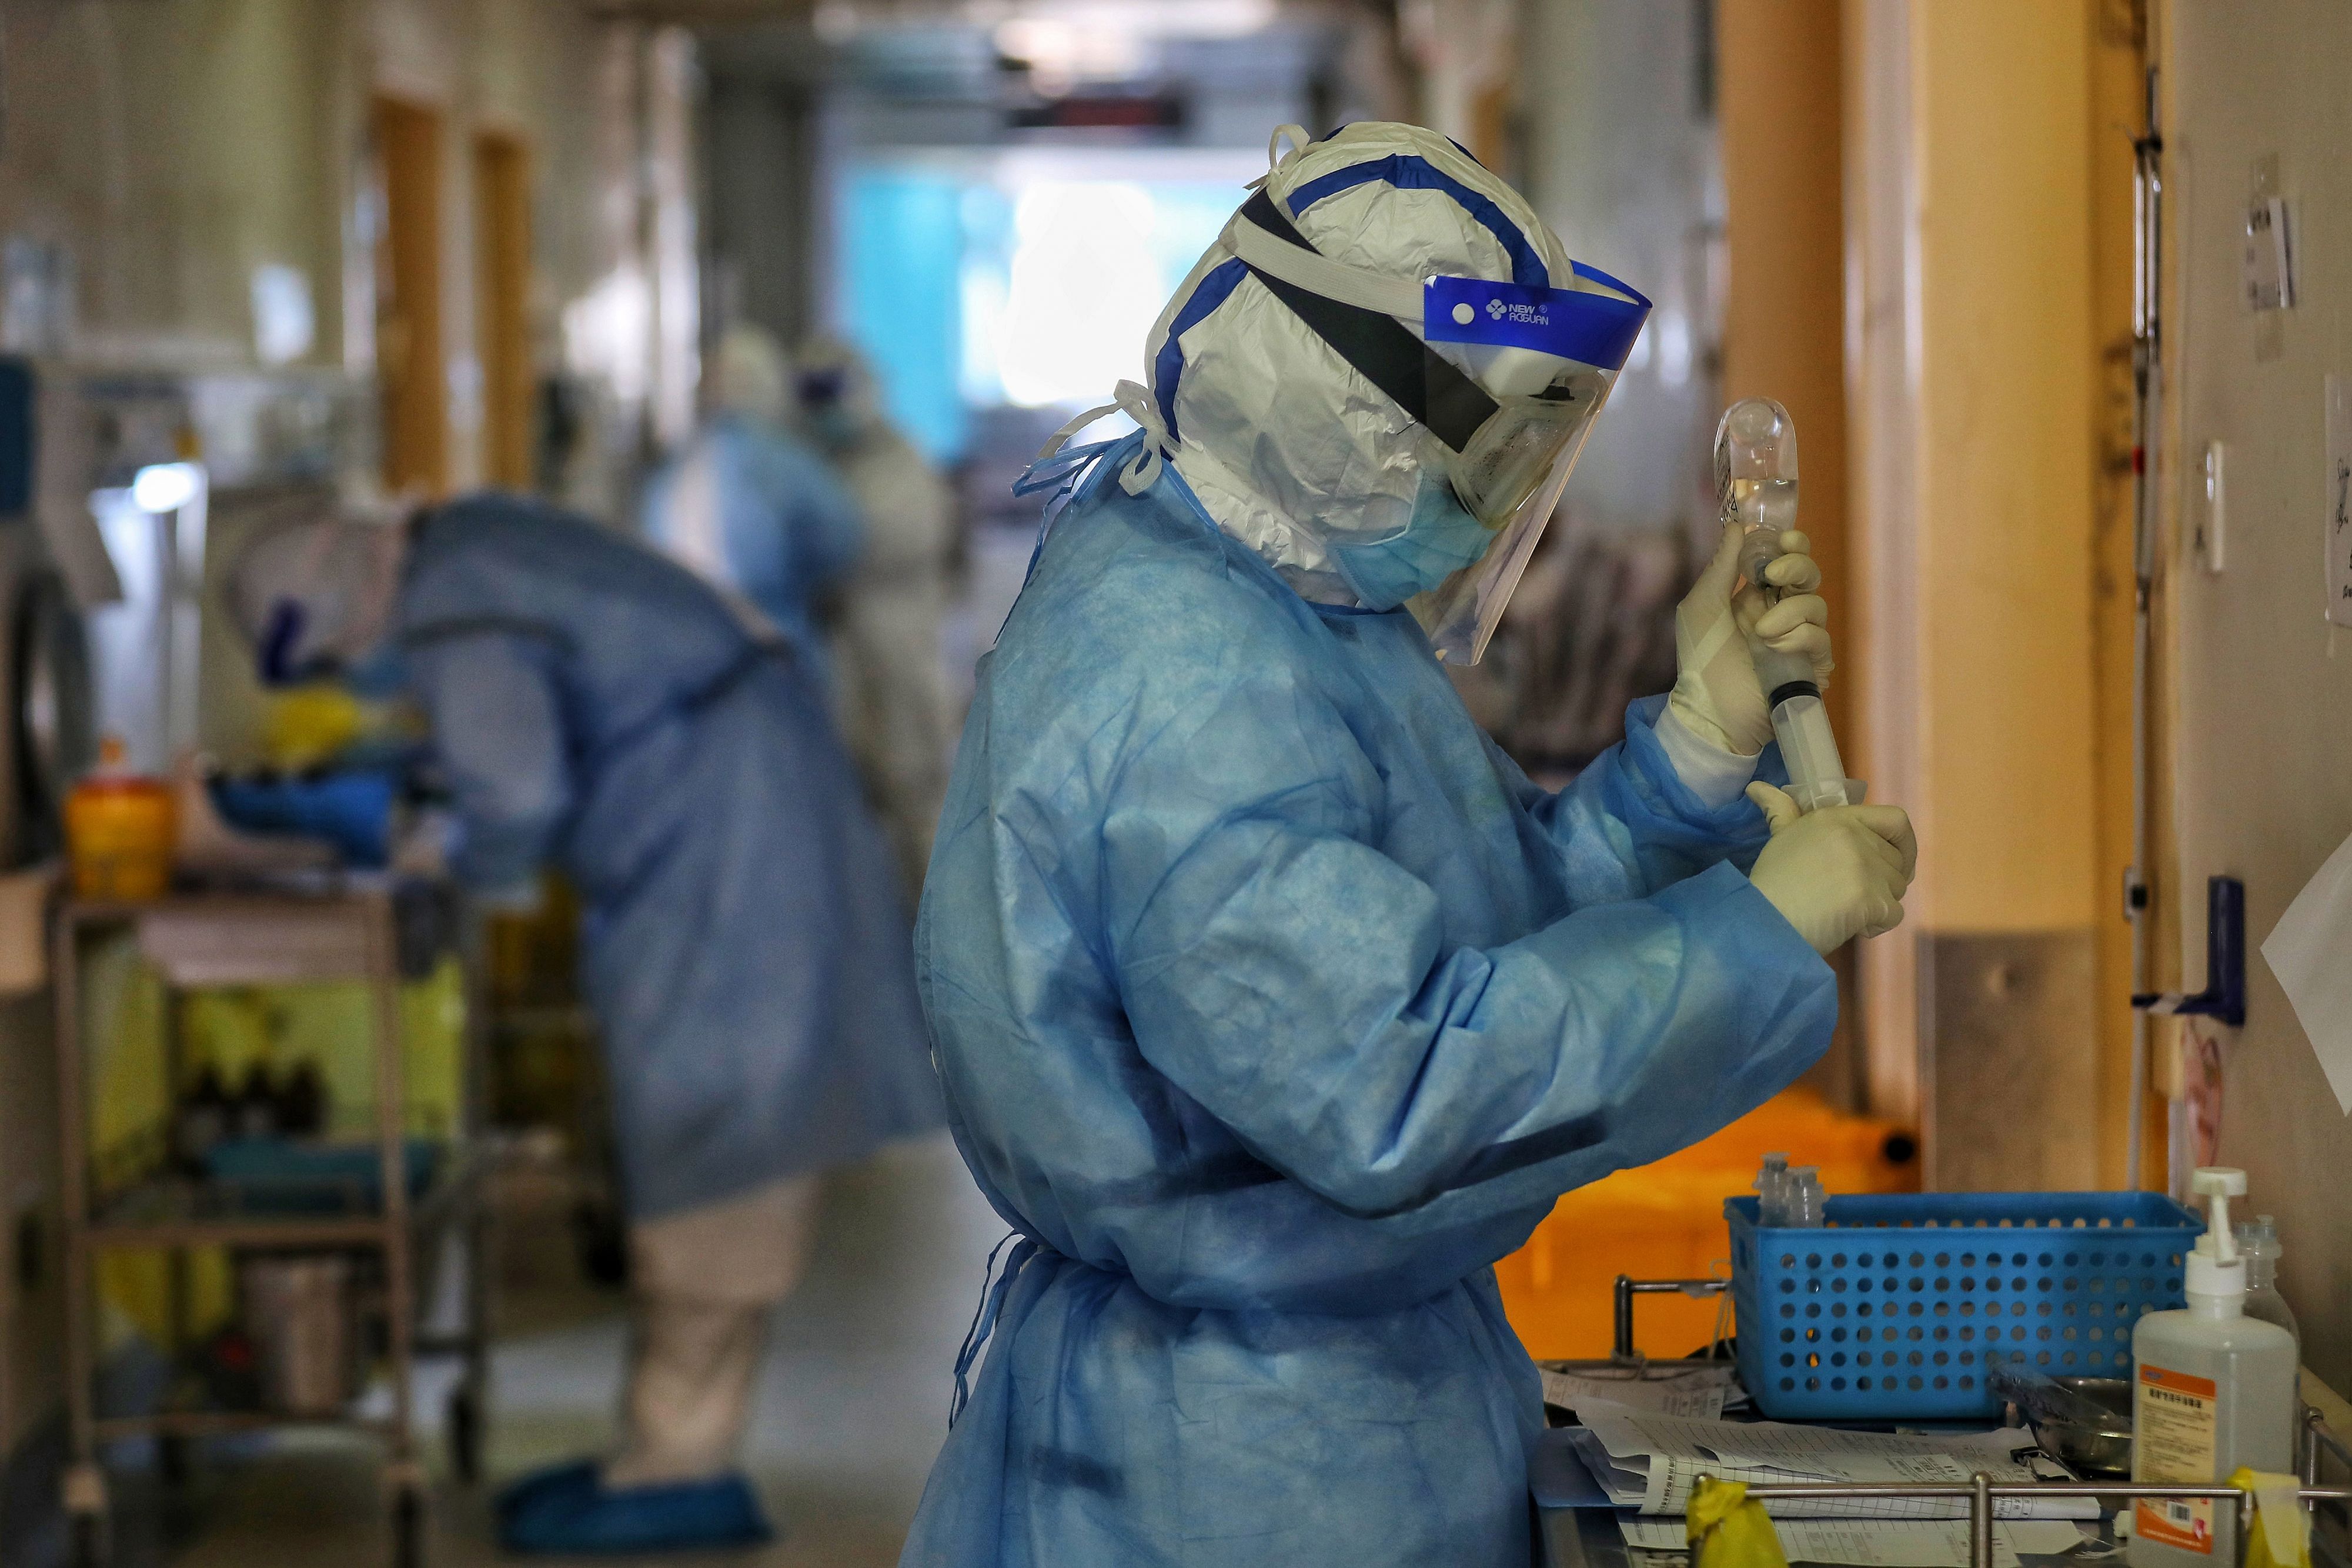 A medical staff member work at Red Cross Hospital in Wuhan in China's central Hubei province on March 11, 2020. (Credit: AFP)